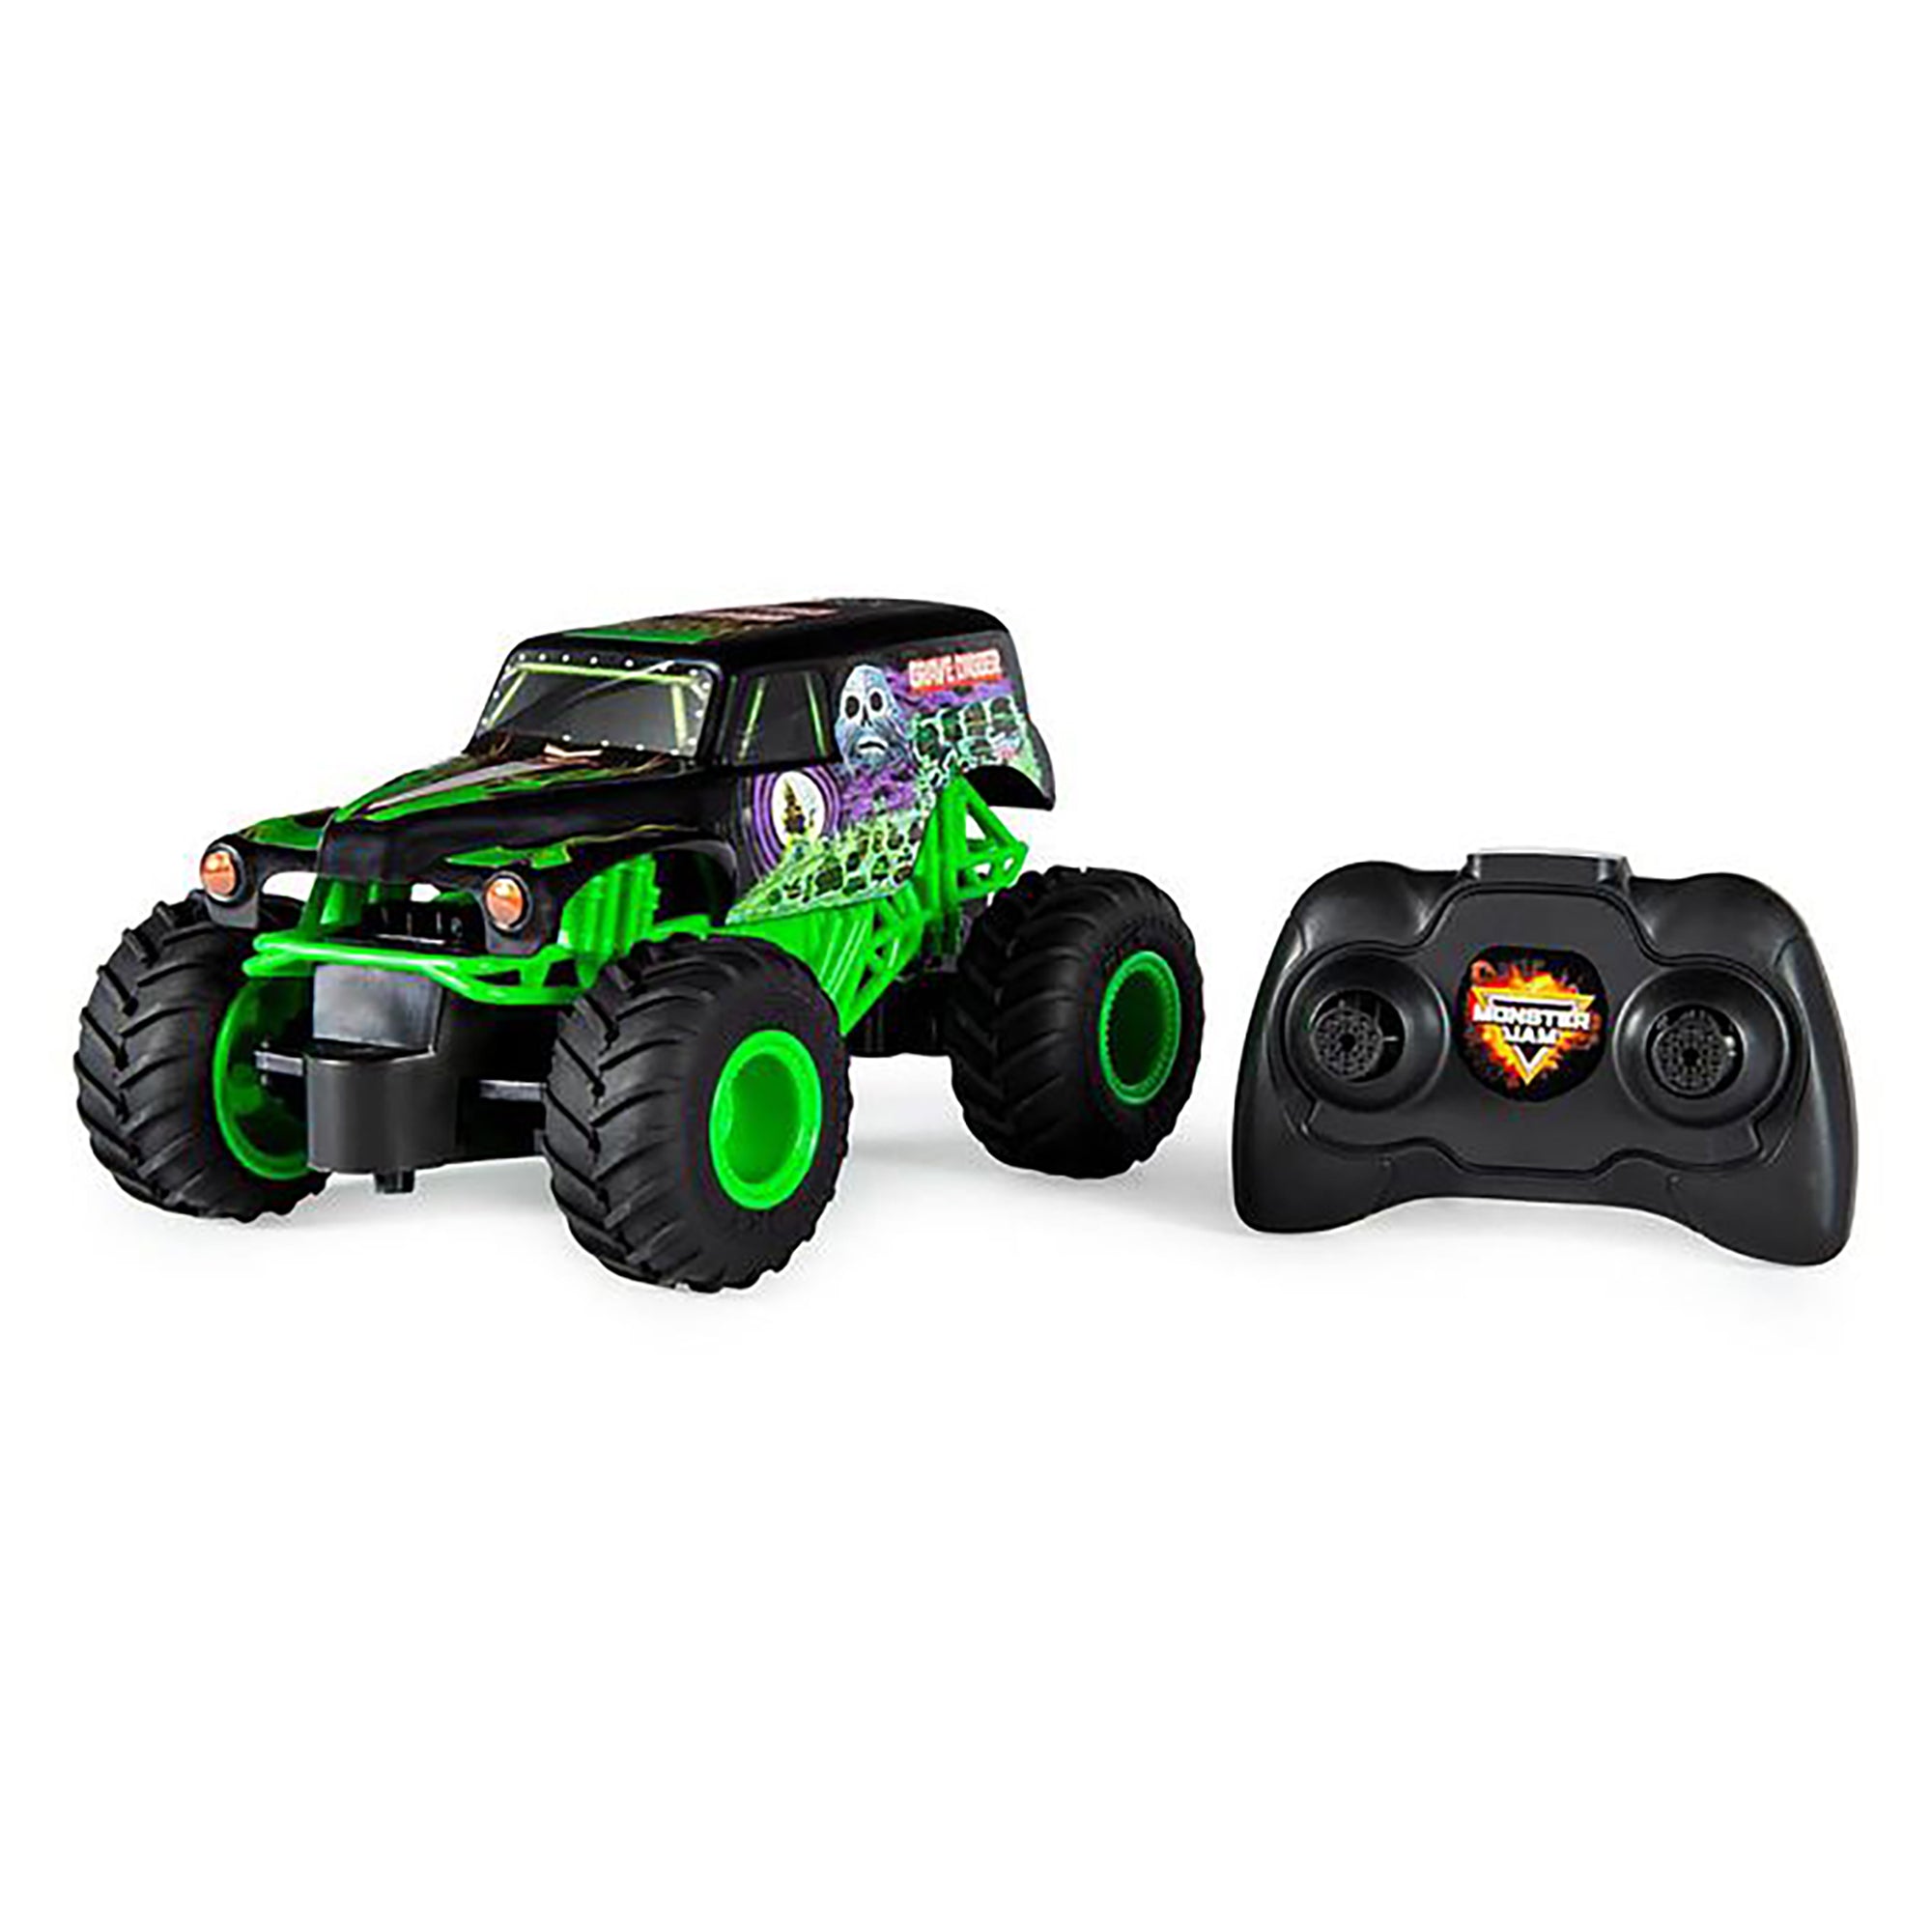  Monster Jam, Official Grave Digger Remote Control Truck 1:15  Scale, 2.4GHz : Toys & Games